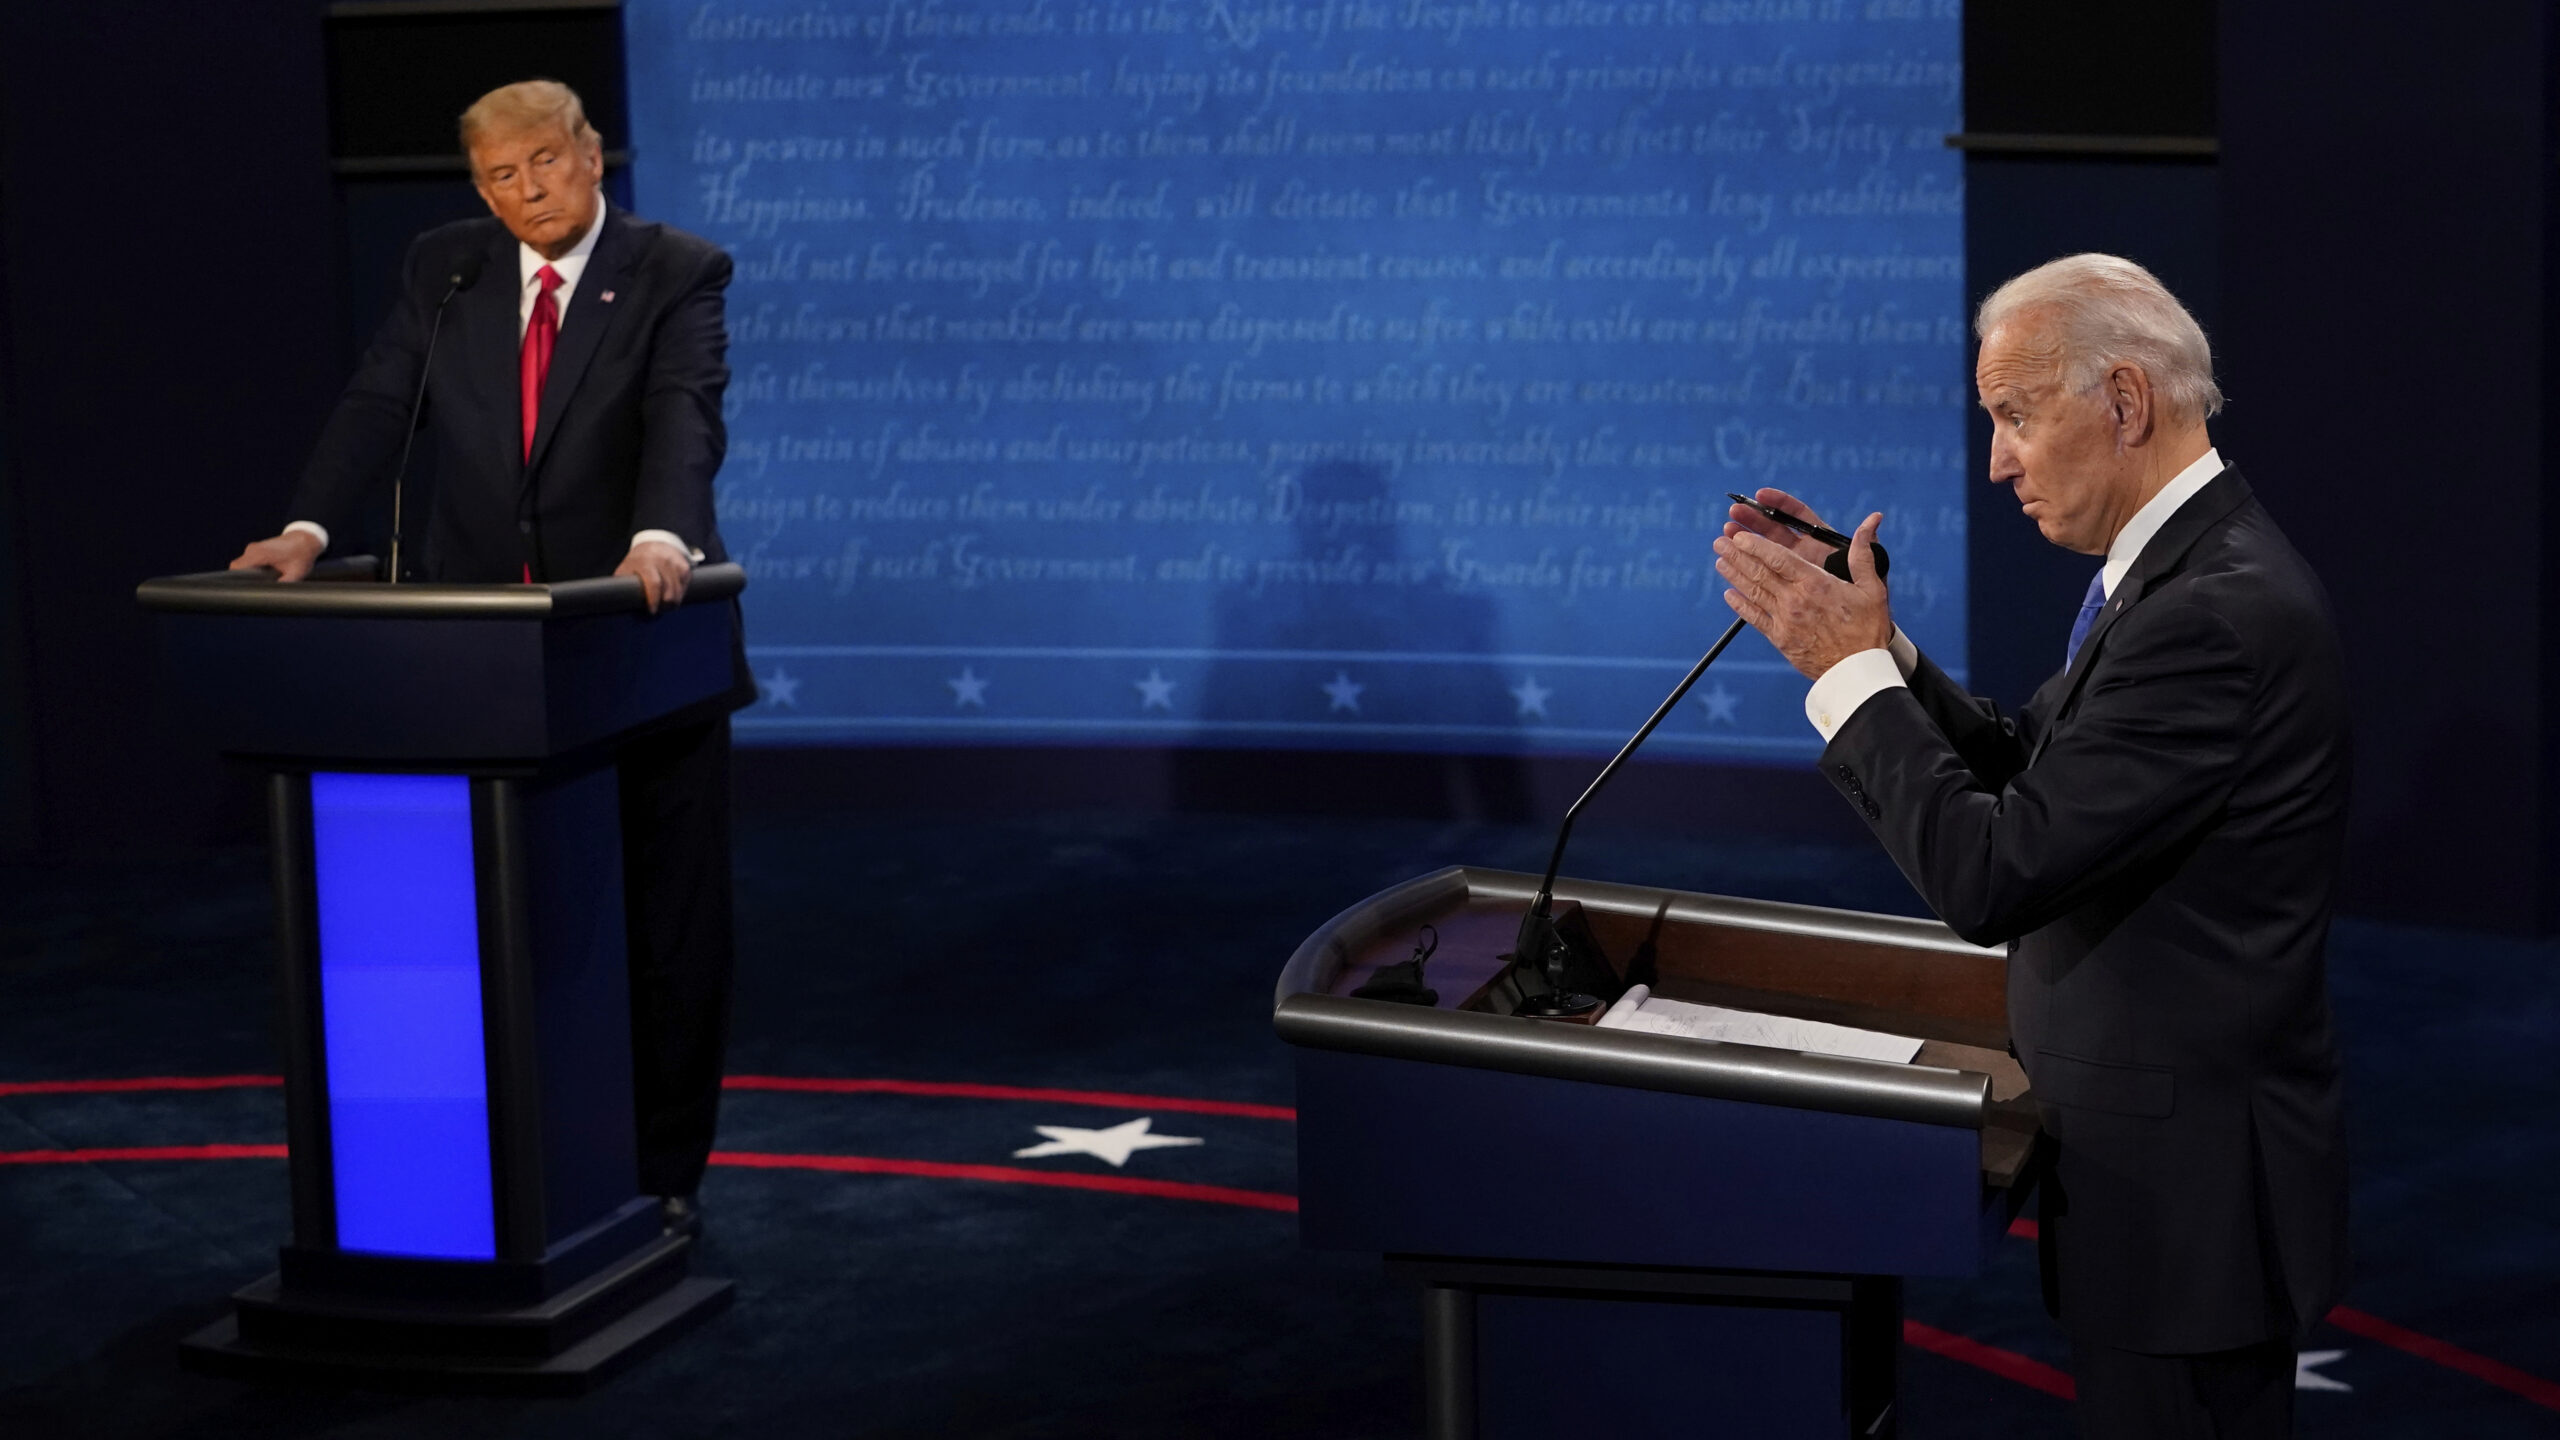 Image of President Biden and former president Trump debating ahdead of the 2020 election. The 3rd p...